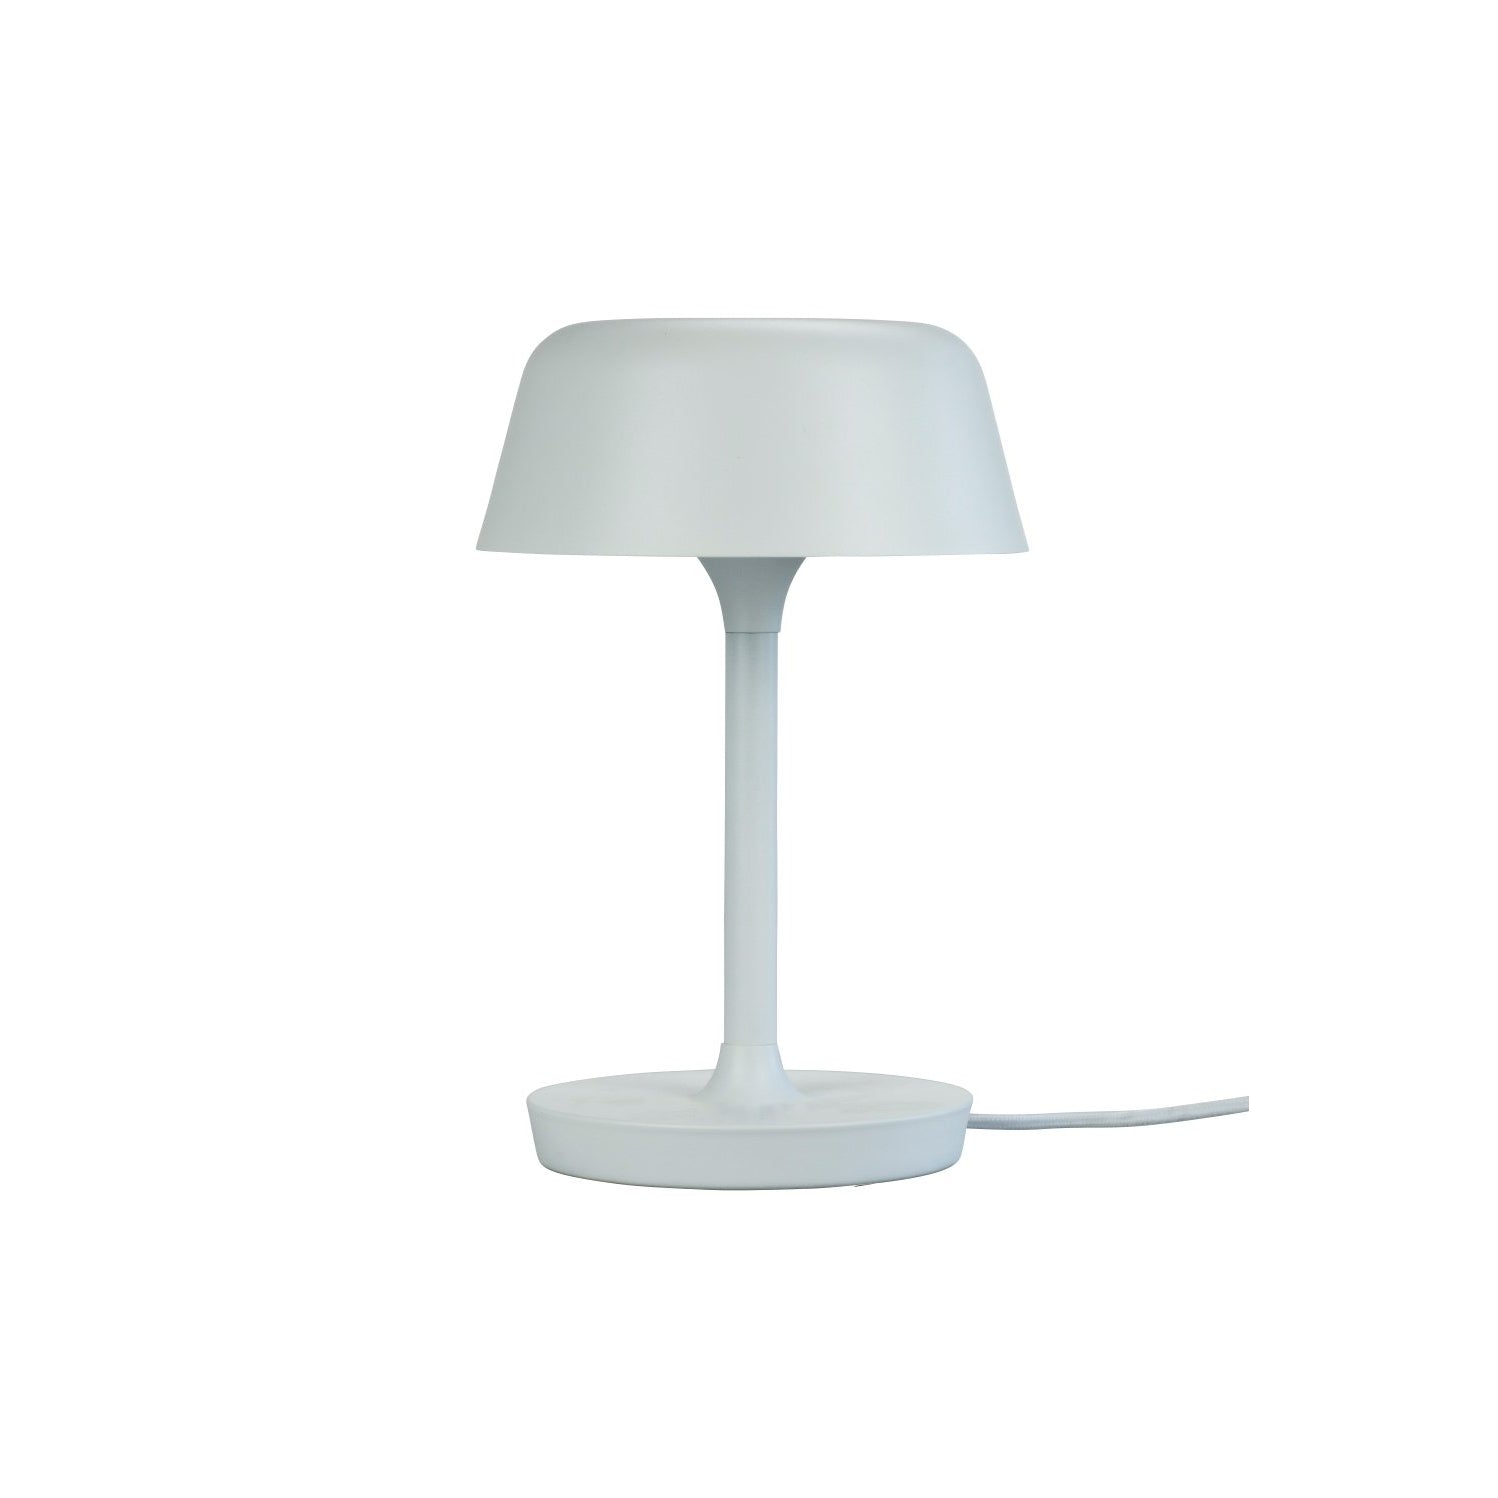 Dyberg Larsen Valencia Led Table Lamp With Wire, White/Brass